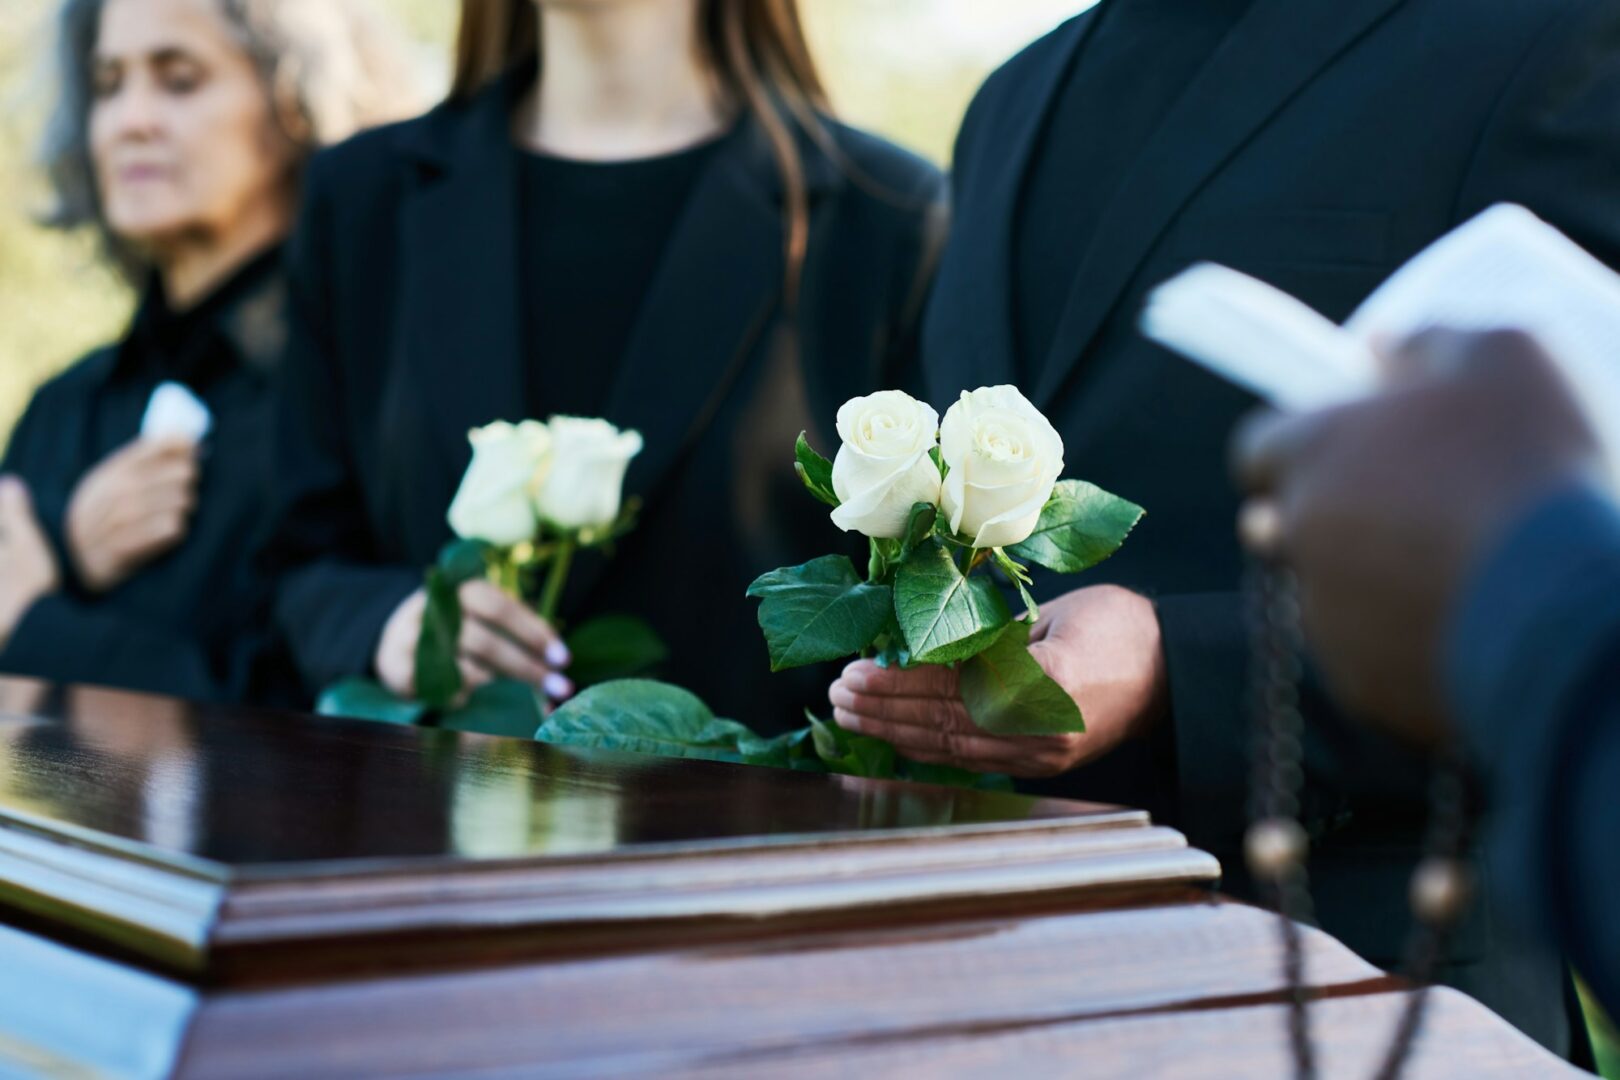 Focus on two fresh white roses held by man in black suit during funeral service